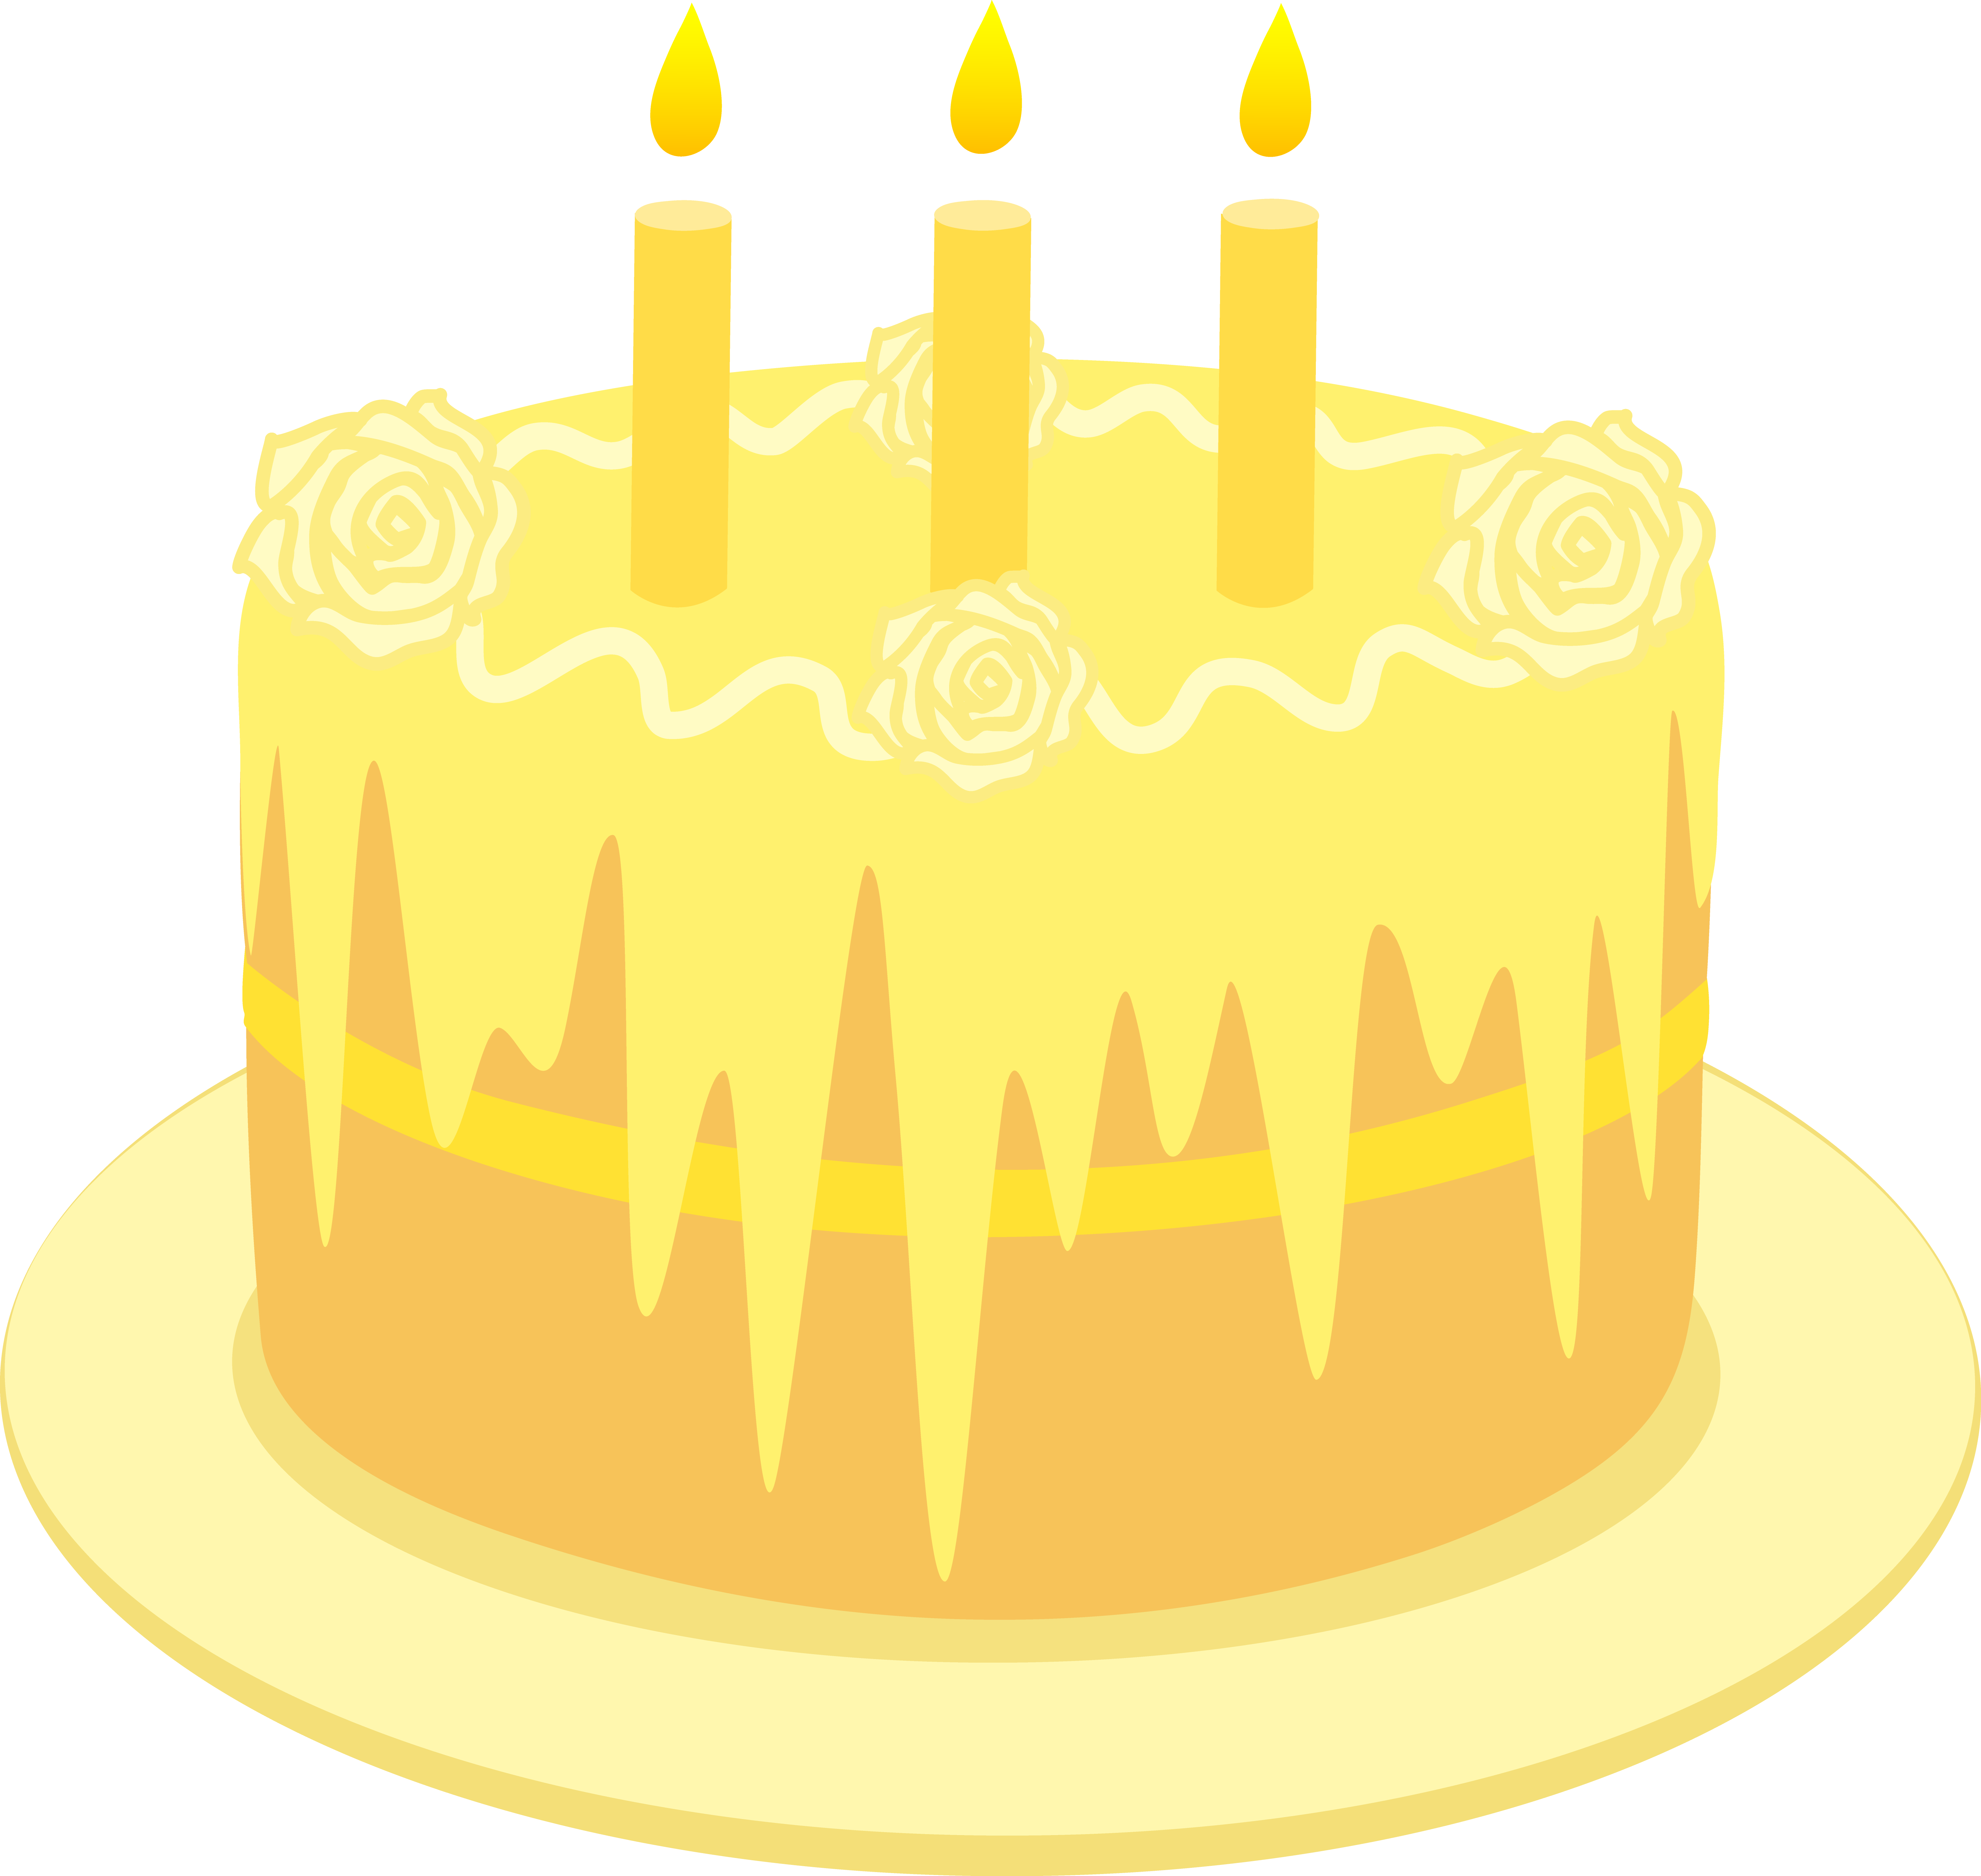 Lemon Birthday Cake With Candles - Free Clip Art